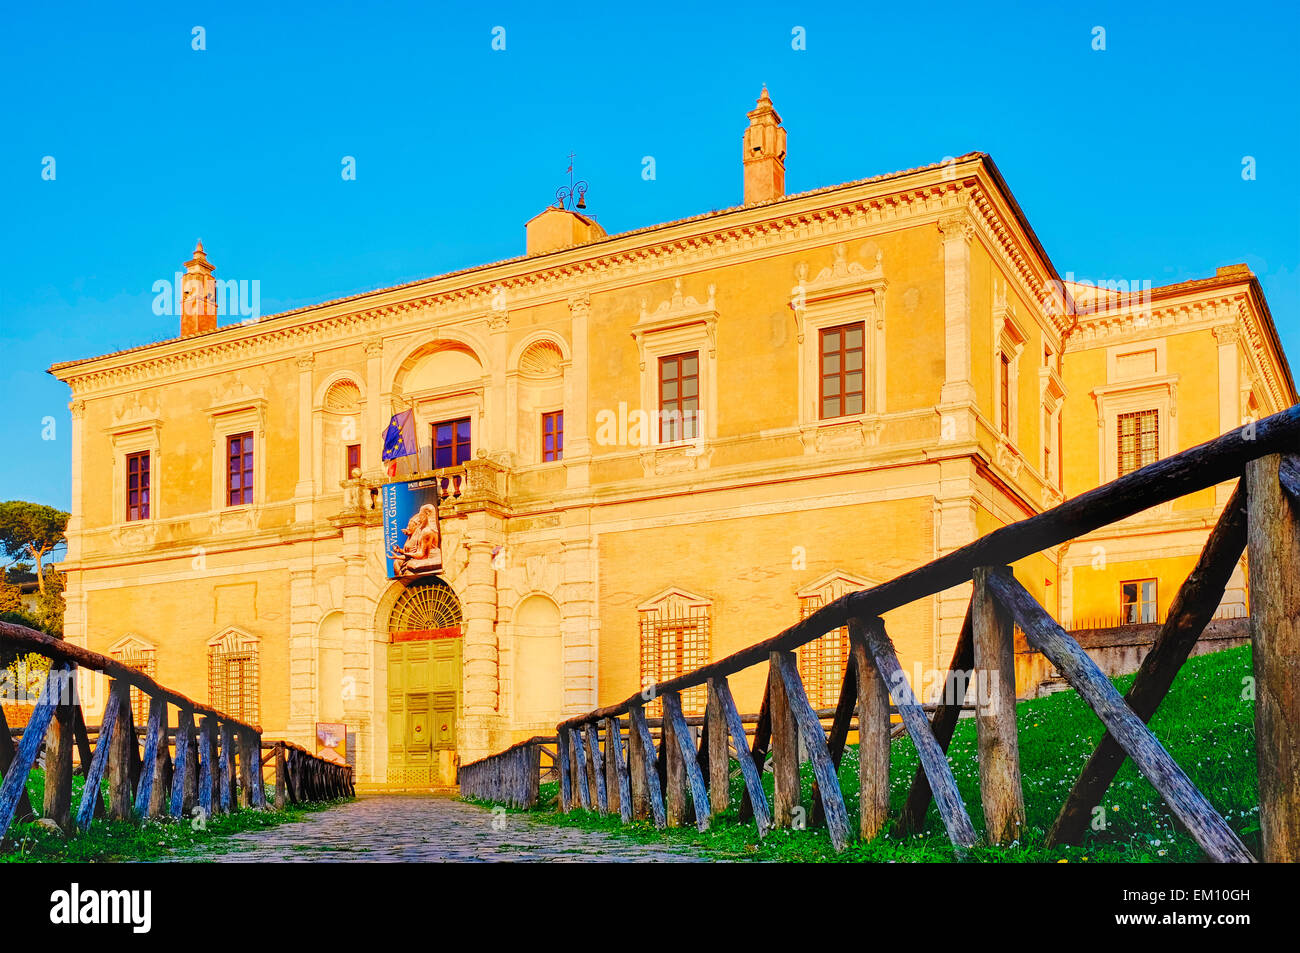 Villa Giulia, home of the Museo Nazionale Etrusco (National Etruscan Museum) , Rome Italy Stock Photo